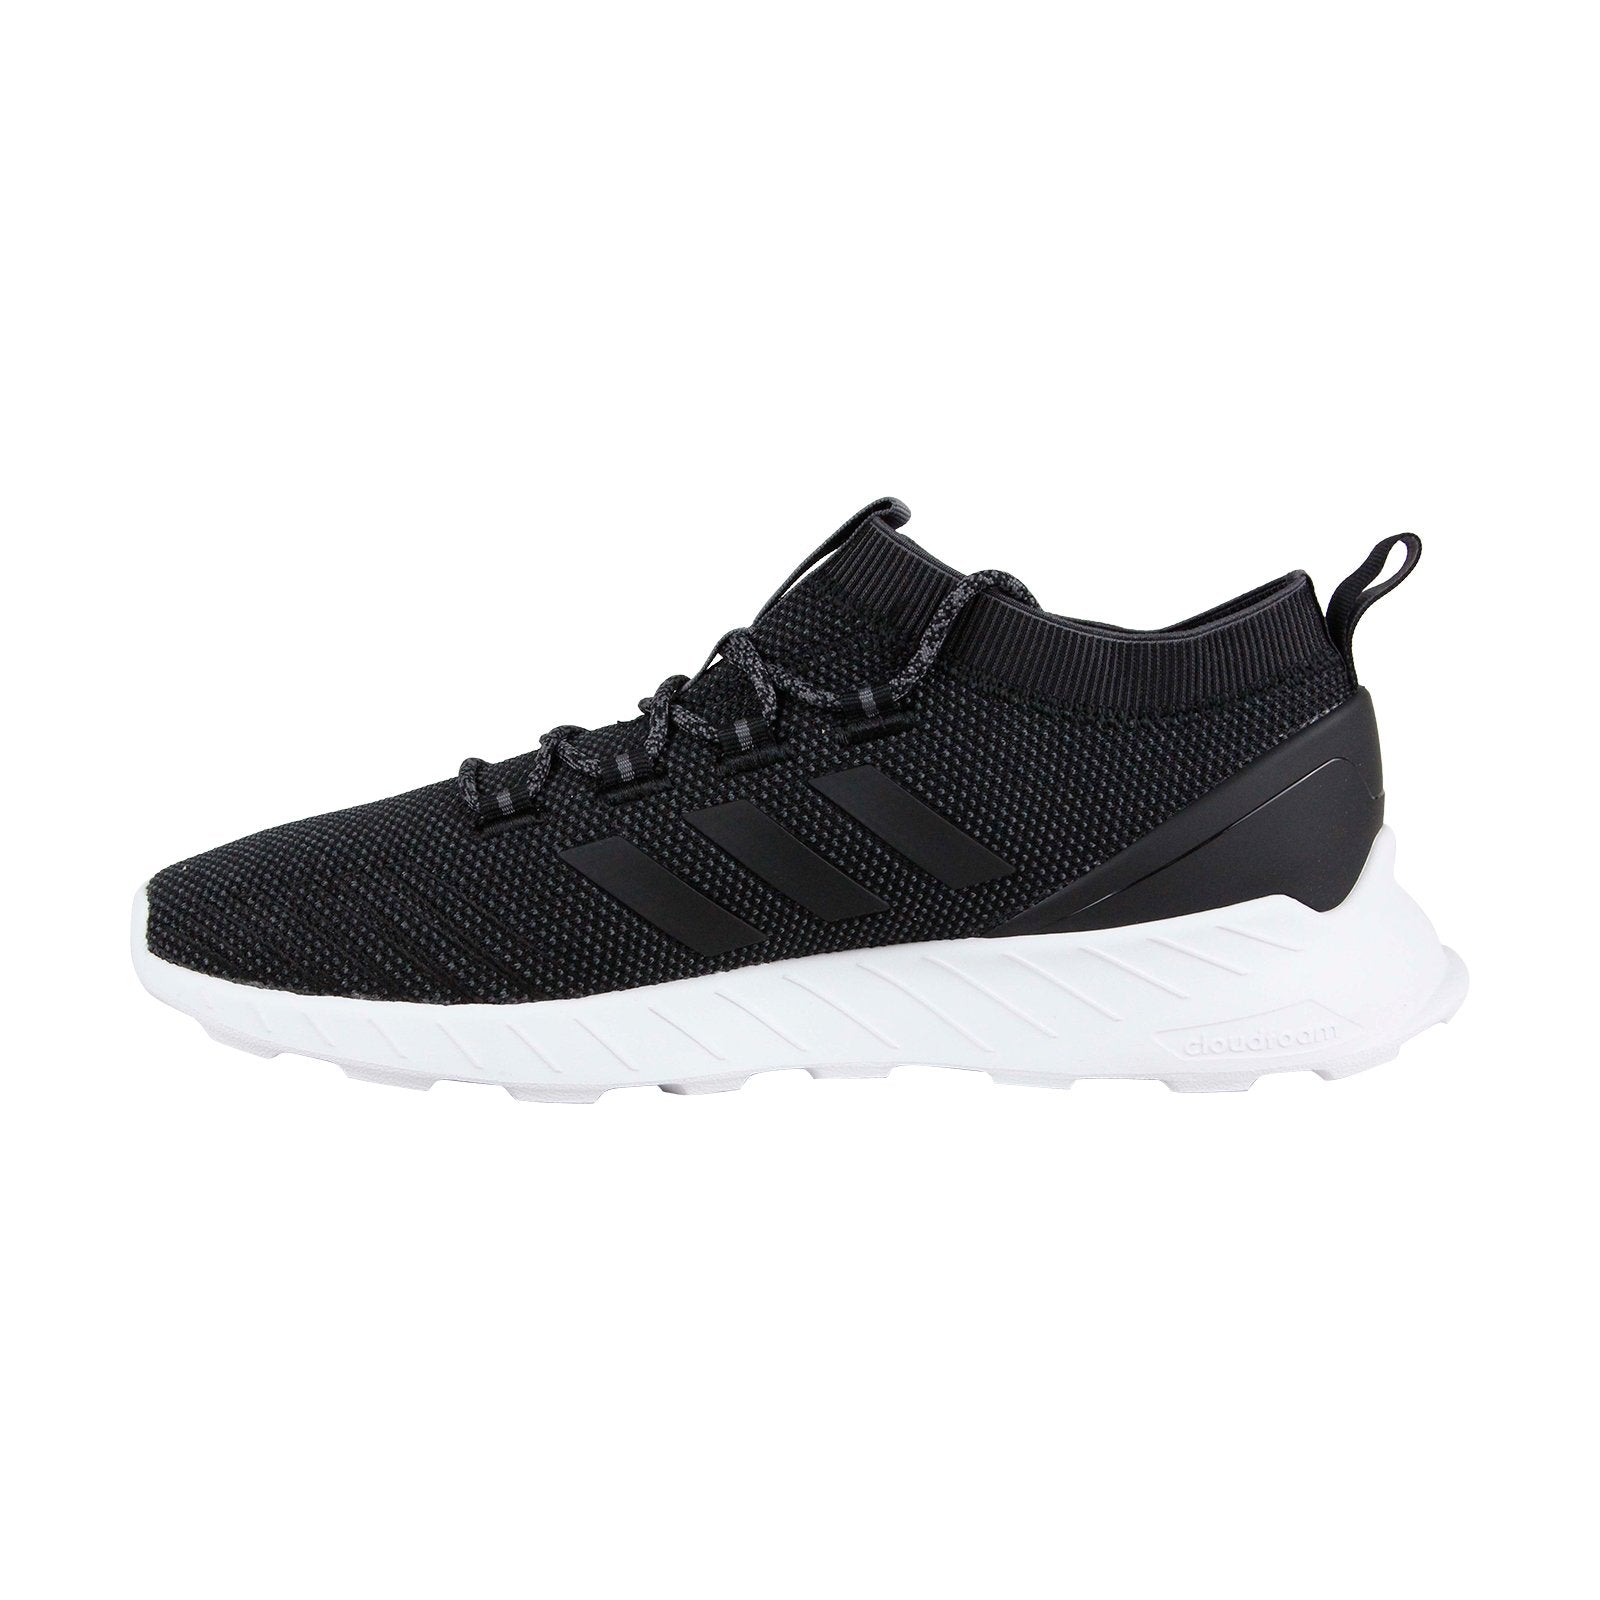 Adidas Mens Black Canvas Lace Up Lifestyle Sneaker - Shoes